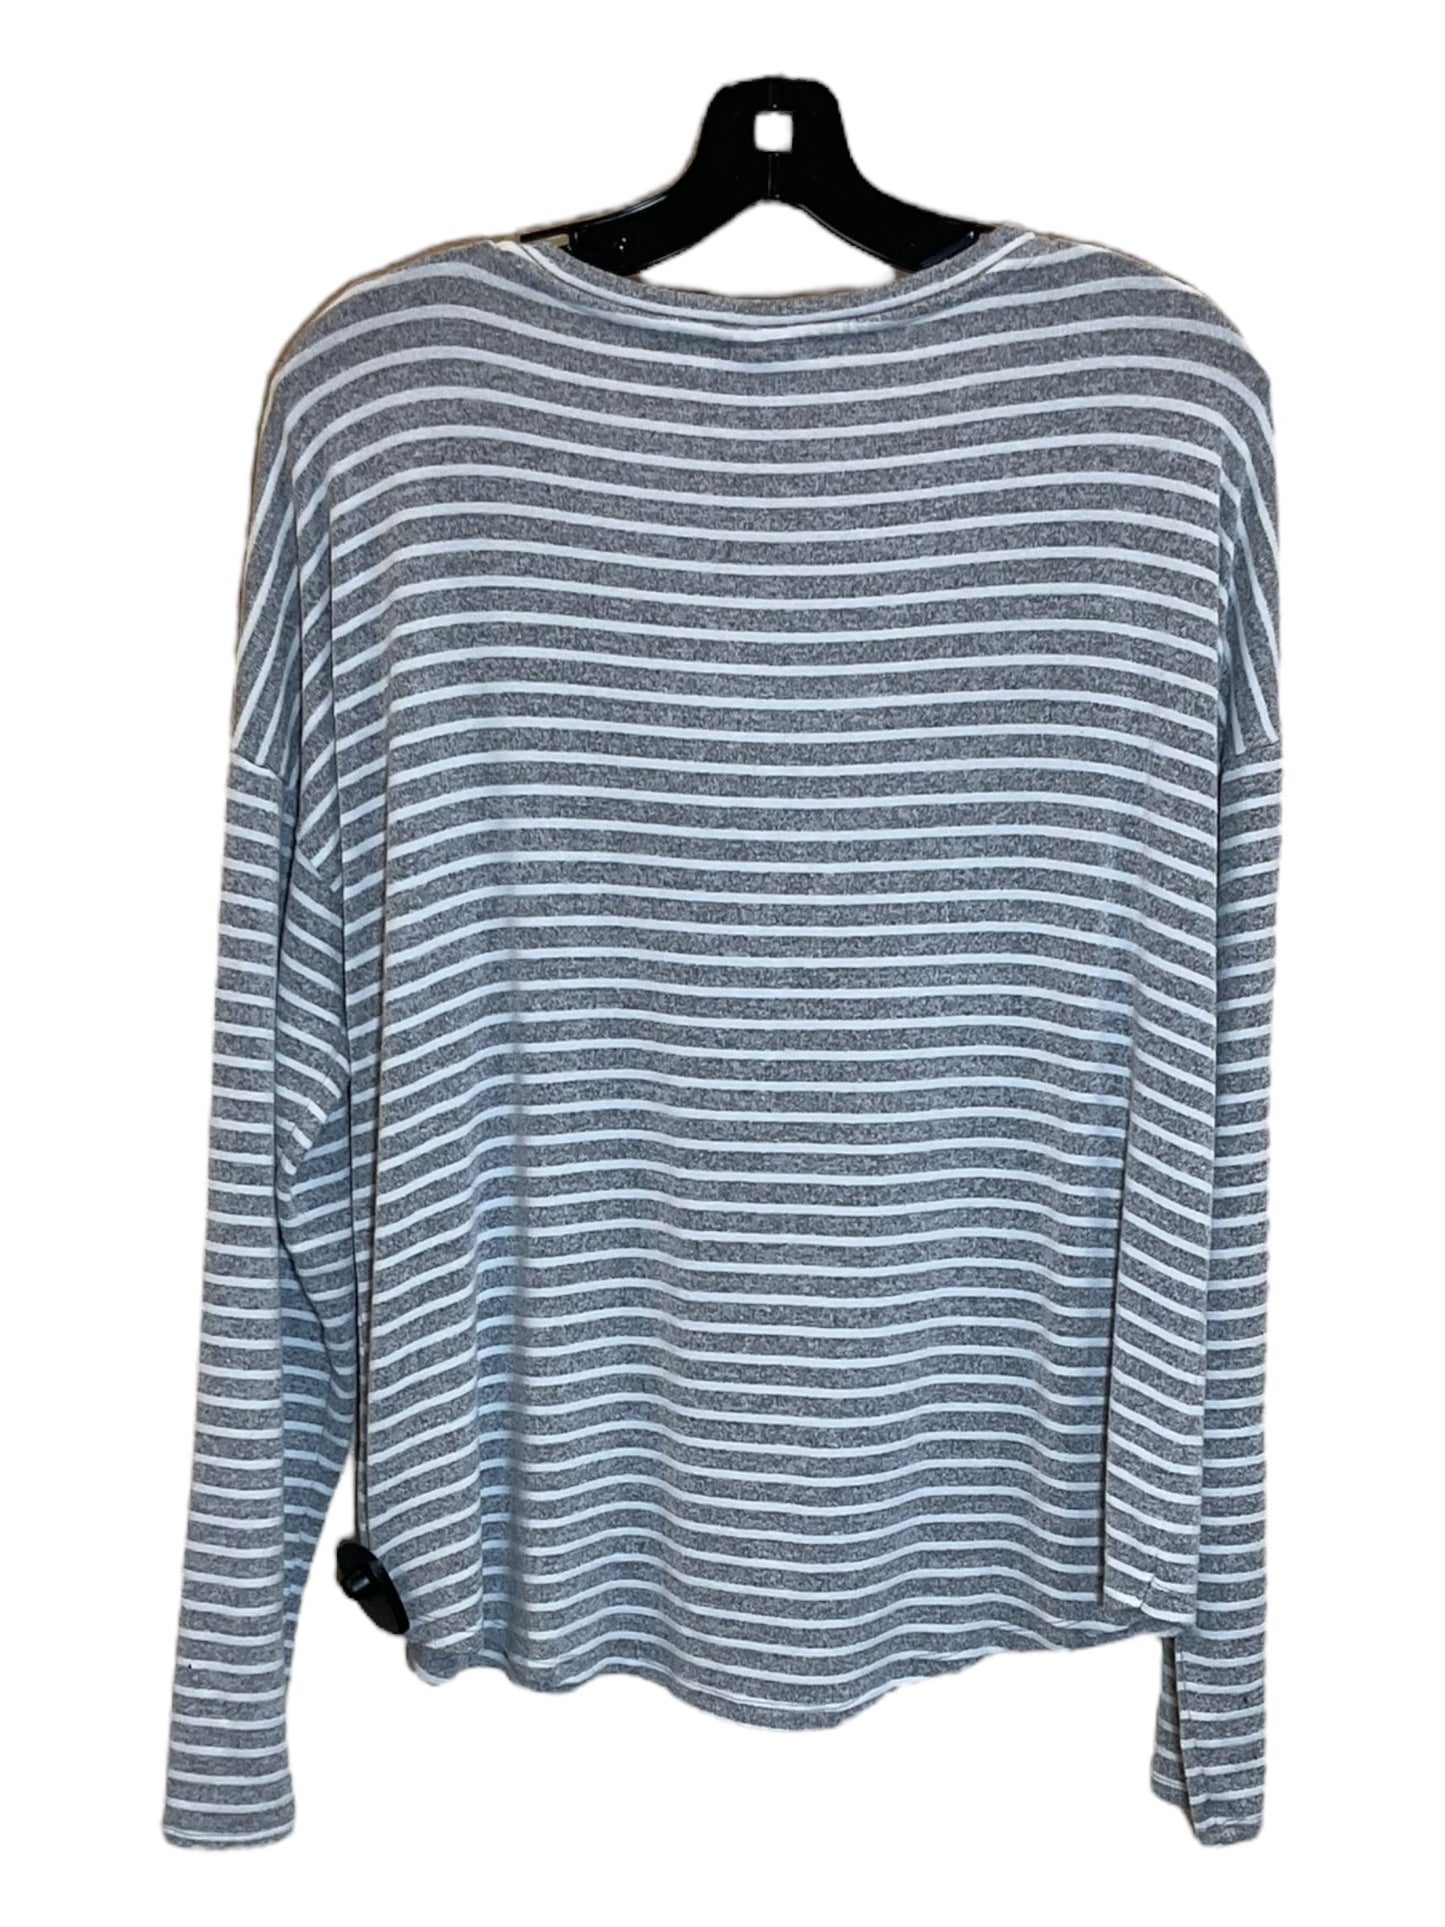 Grey & White Top Long Sleeve A New Day, Size L